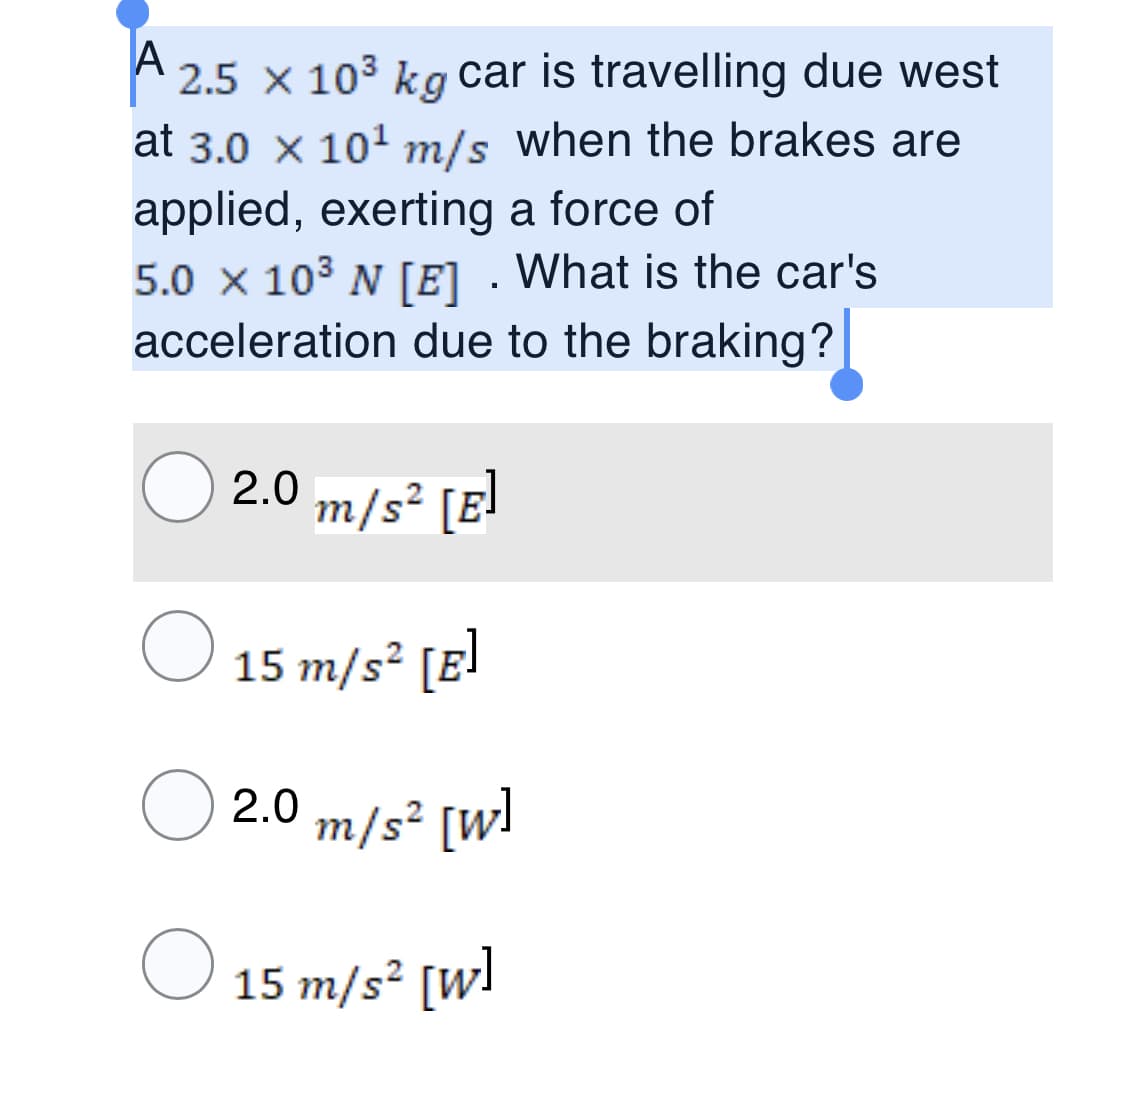 A
2.5 x 103 kg car is travelling due west
at 3.0 x 101 m/s when the brakes are
applied, exerting a force of
5.0 x 103 N [E] . What is the car's
acceleration due to the braking?|
2.0 m/s² [E!
15 m/s² [E]
2.0 m/s² [W!
15 m/s² [w!
